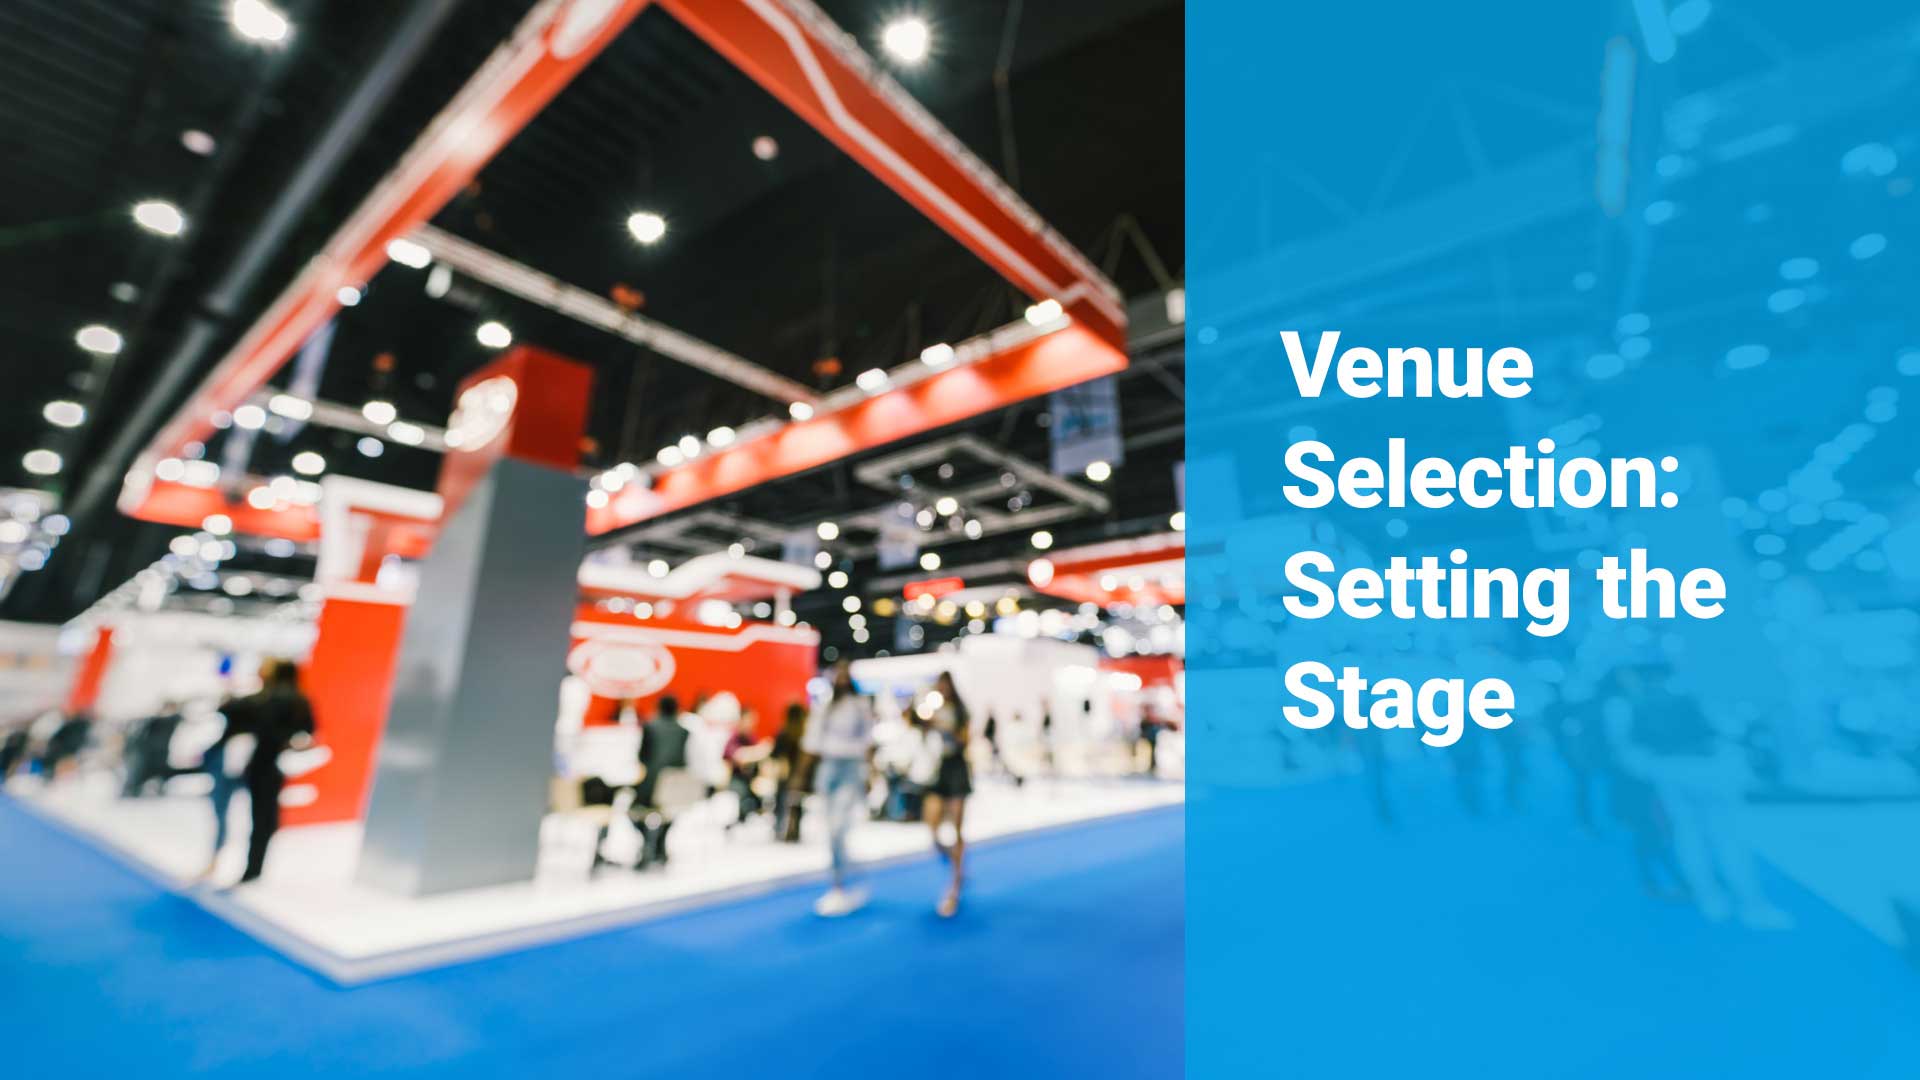 Venue Selection: Setting the Stage